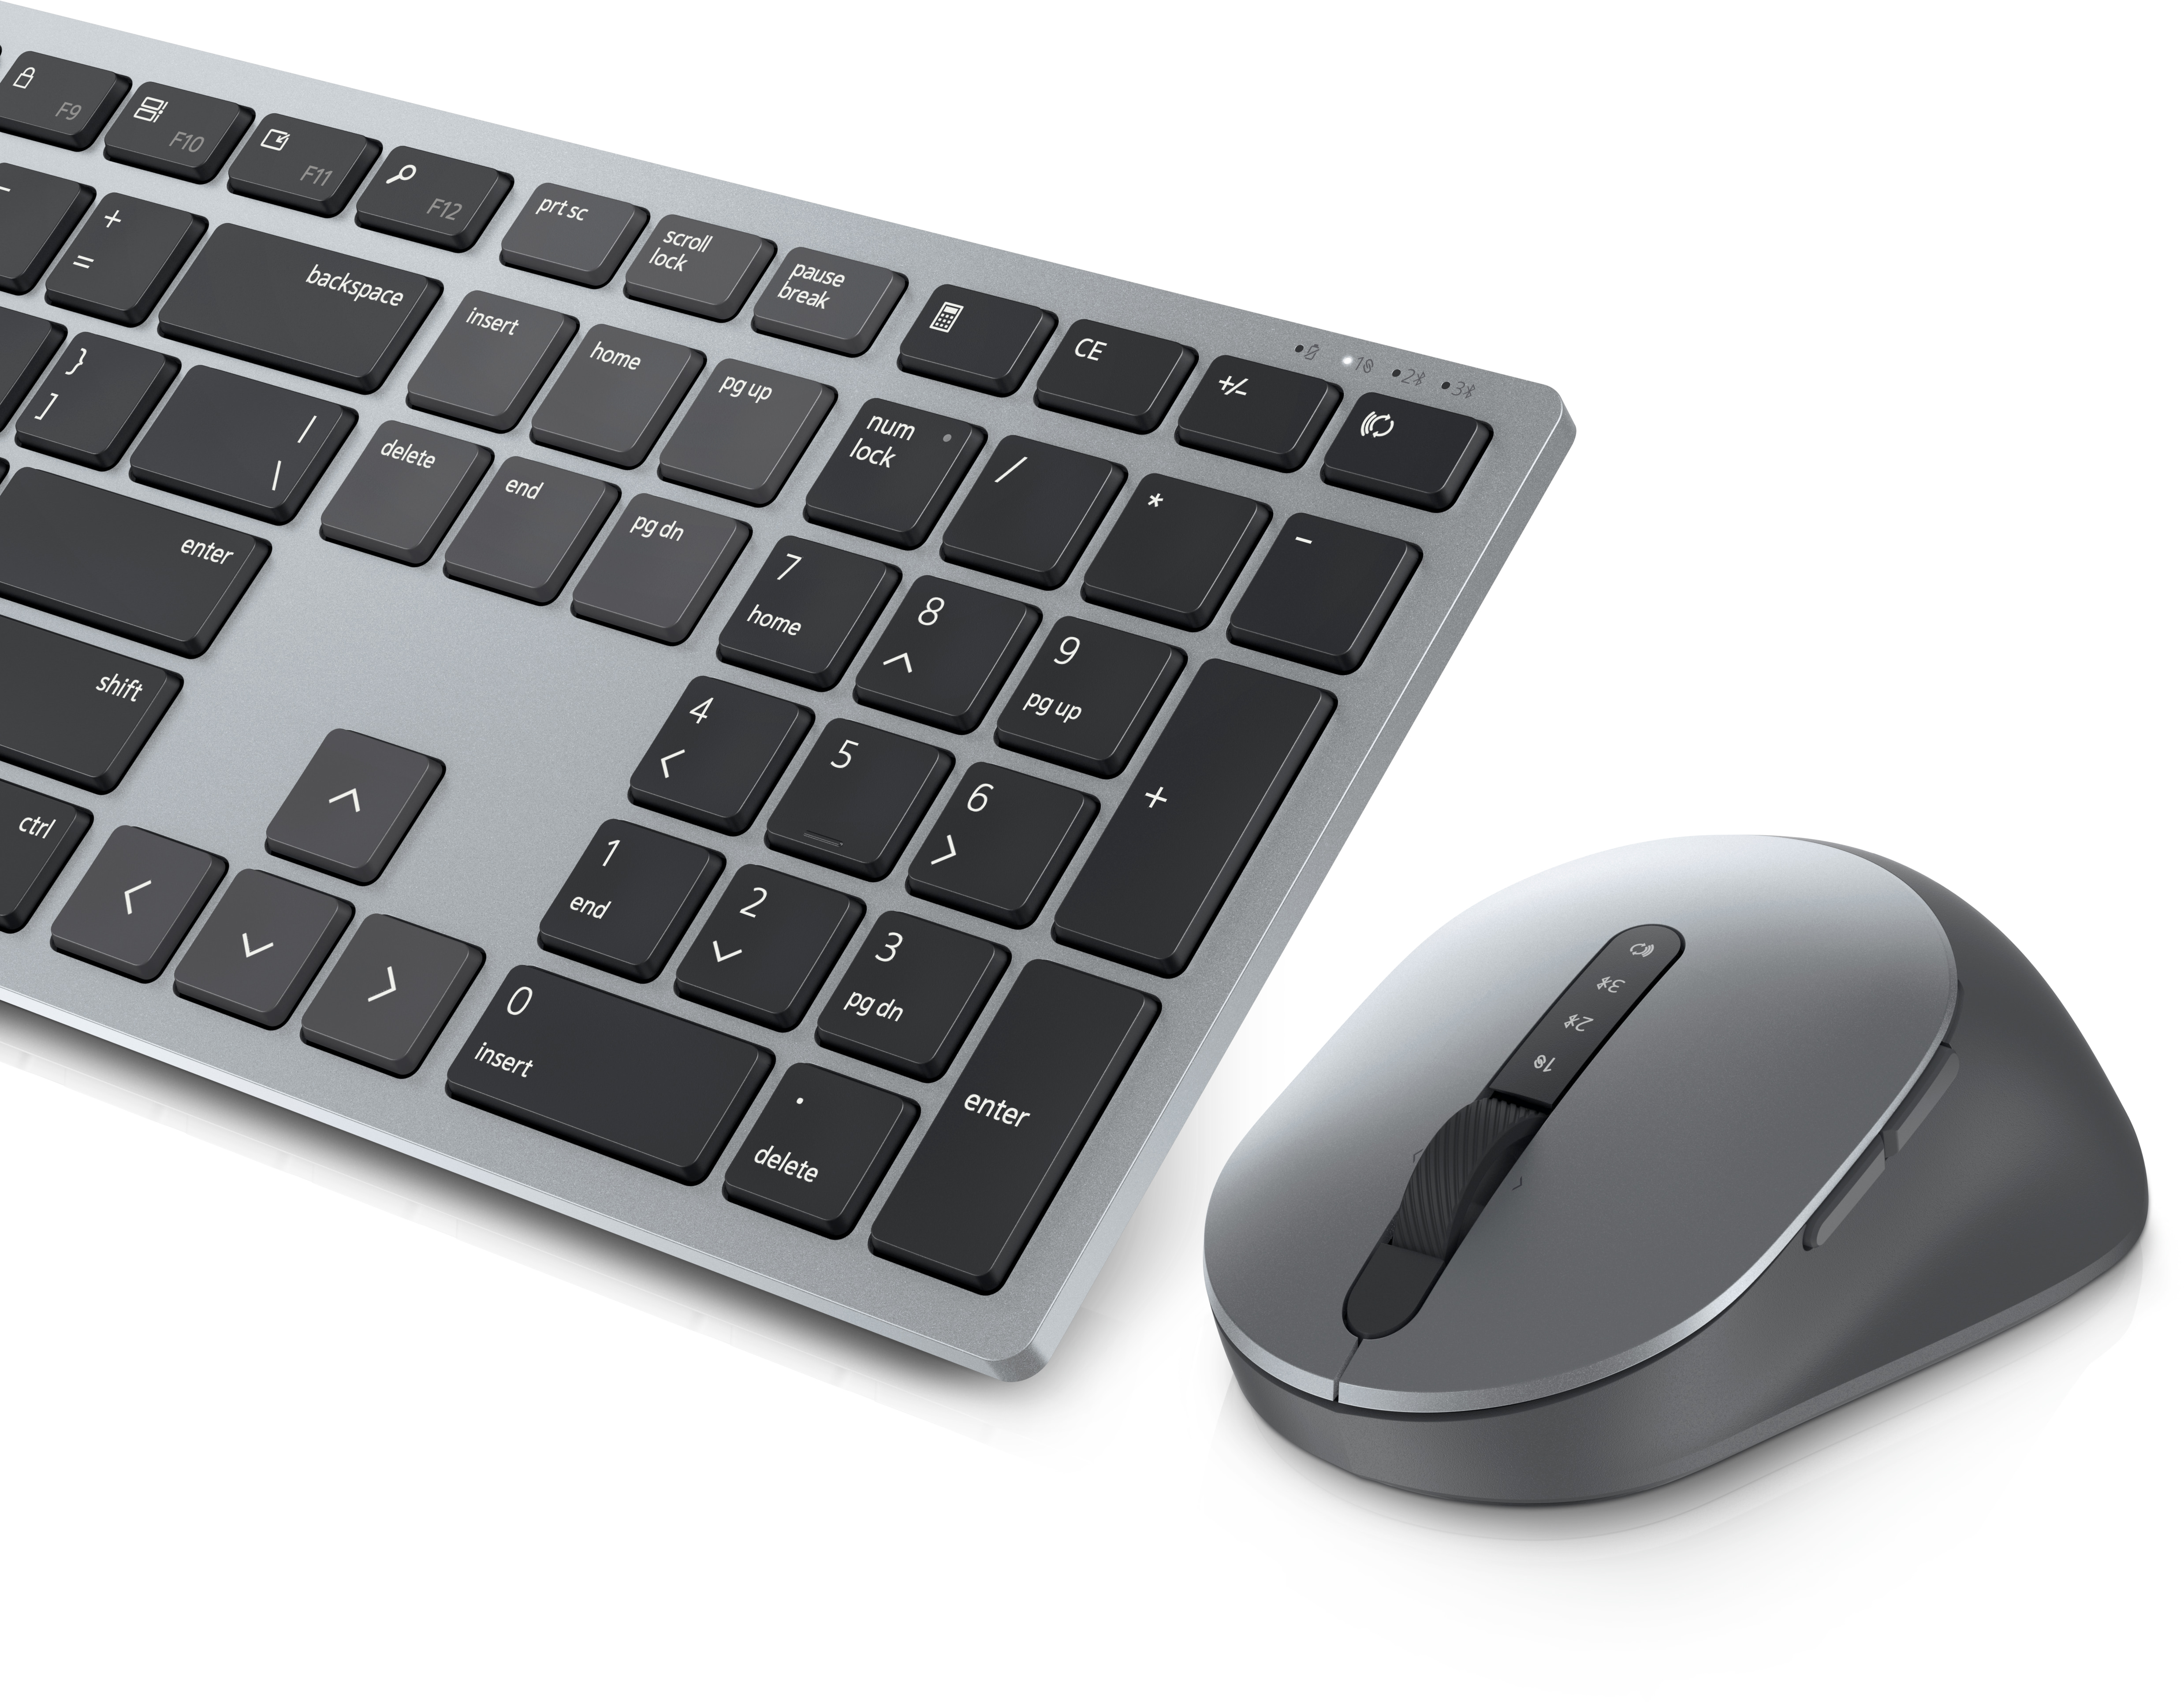 Dell Premier Multi-Device Wireless Keyboard and Mouse – KM7321W 